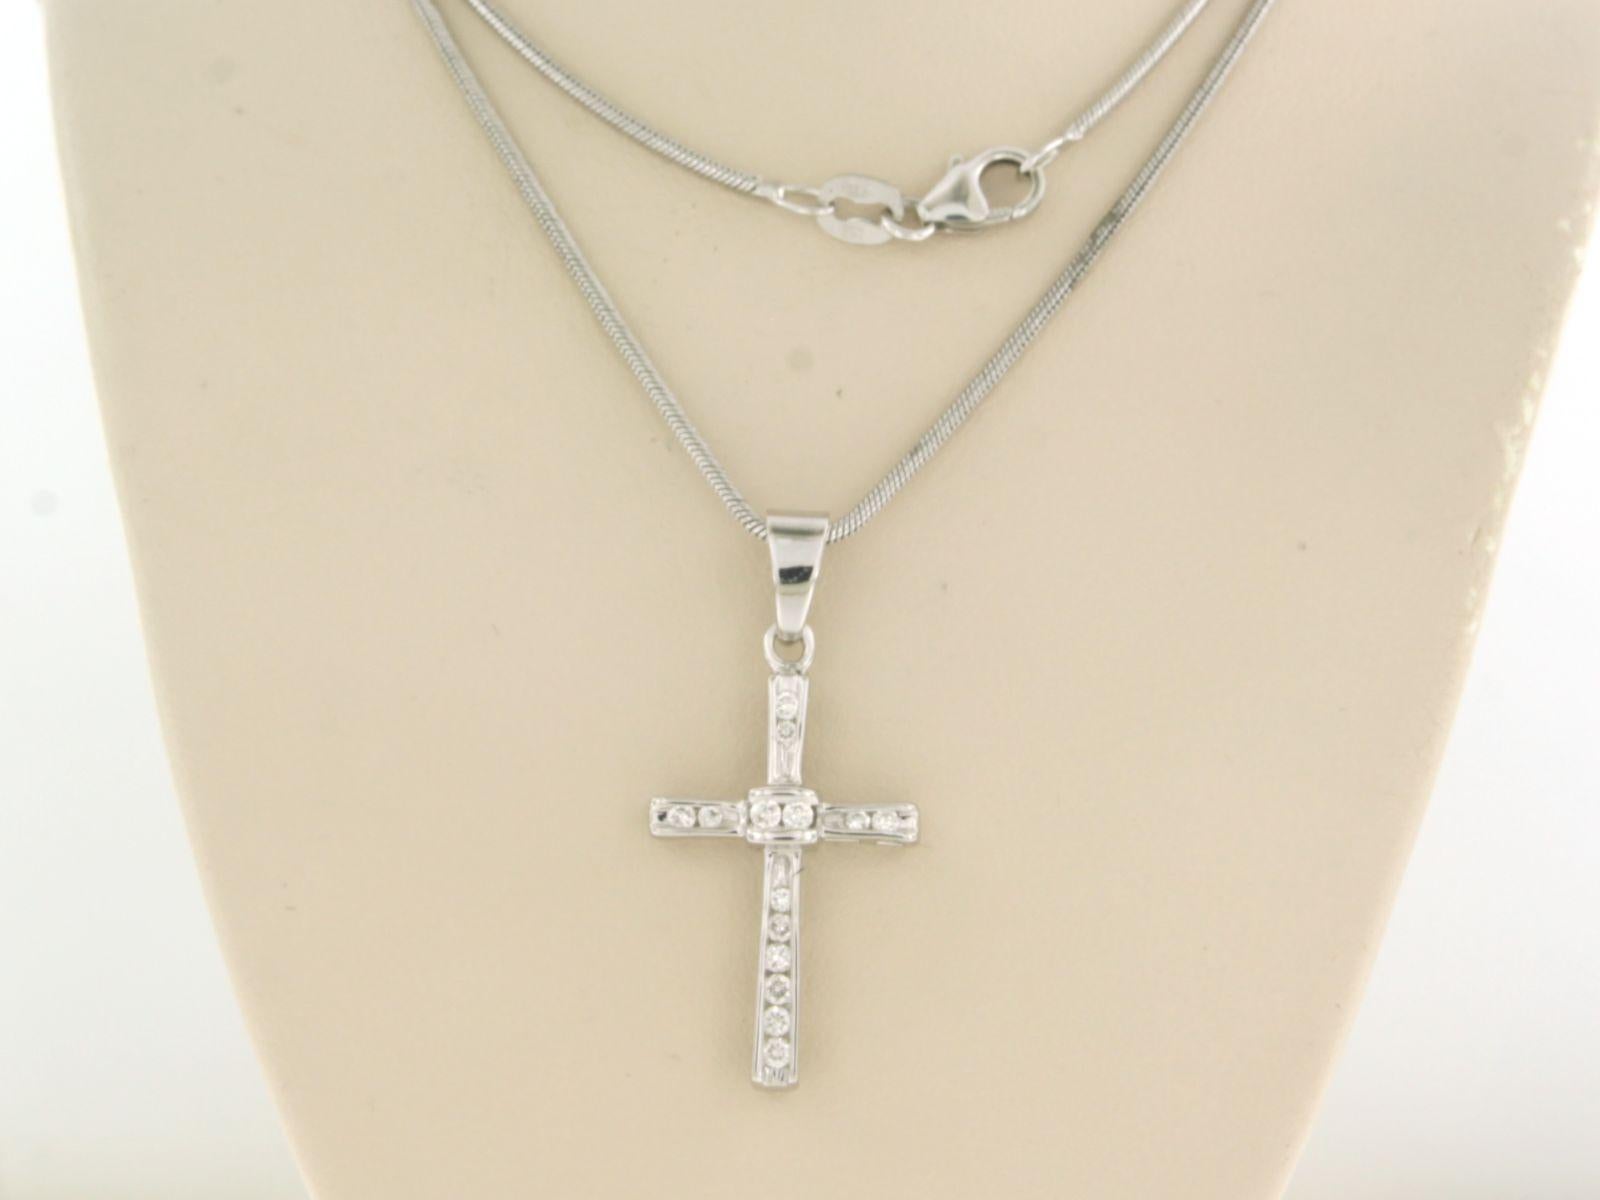 14k white gold necklace with cross pendant set with brilliant cut diamond 0.20 ct F/G - VS/SI - 50 cm

detailed description:

the length of the necklace is 50 cm long by 1.0 mm wide

the size of the pendant is 3.3 cm by 1.6 mm wide

Total weight 8.4